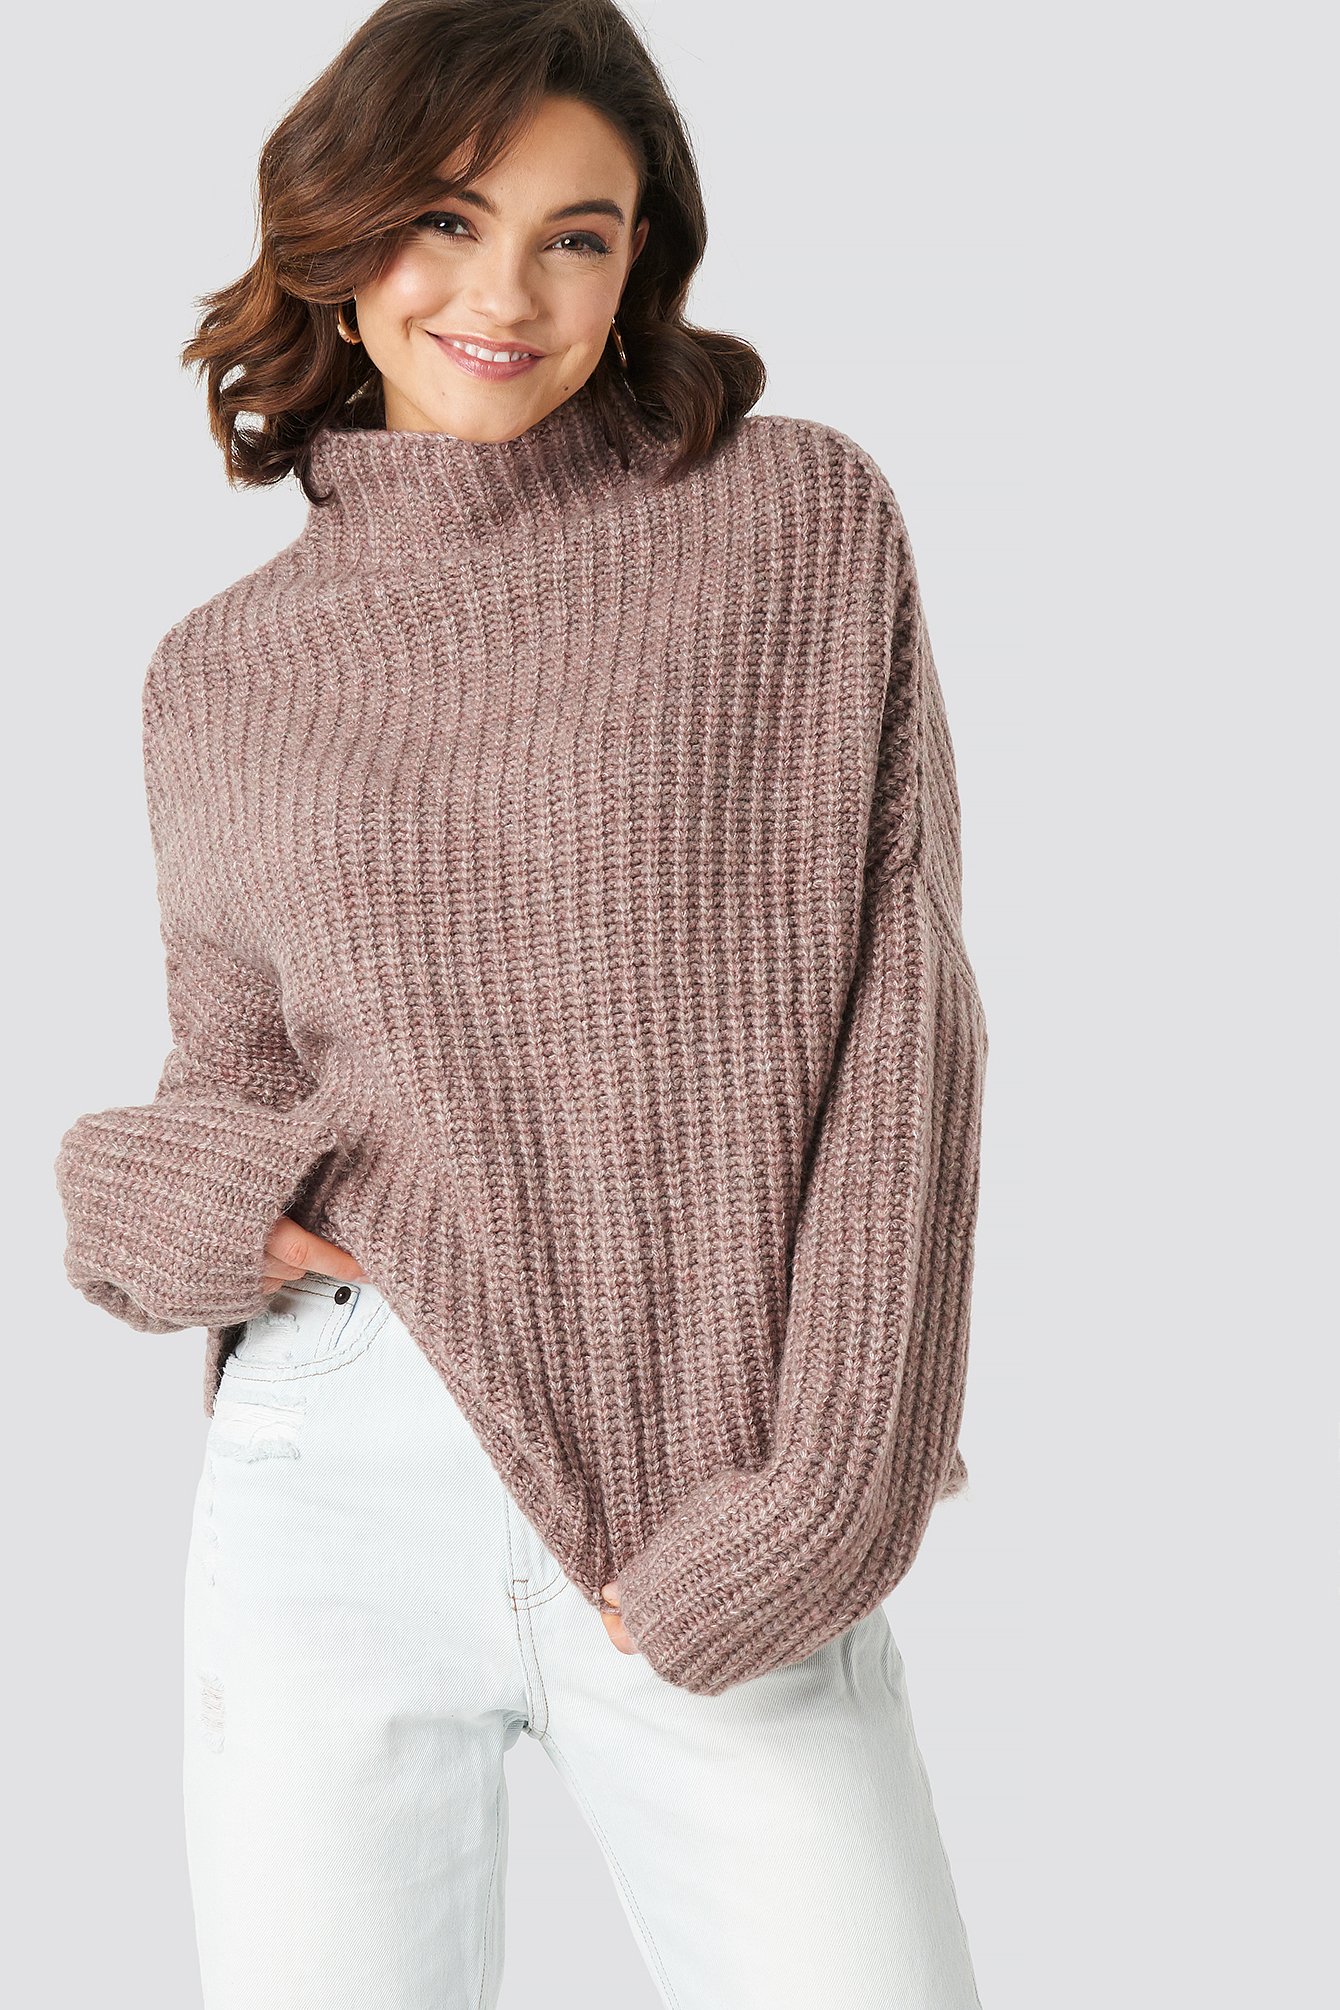 Dusty Pink NA-KD Trend Boxy High Neck Knitted Sweater